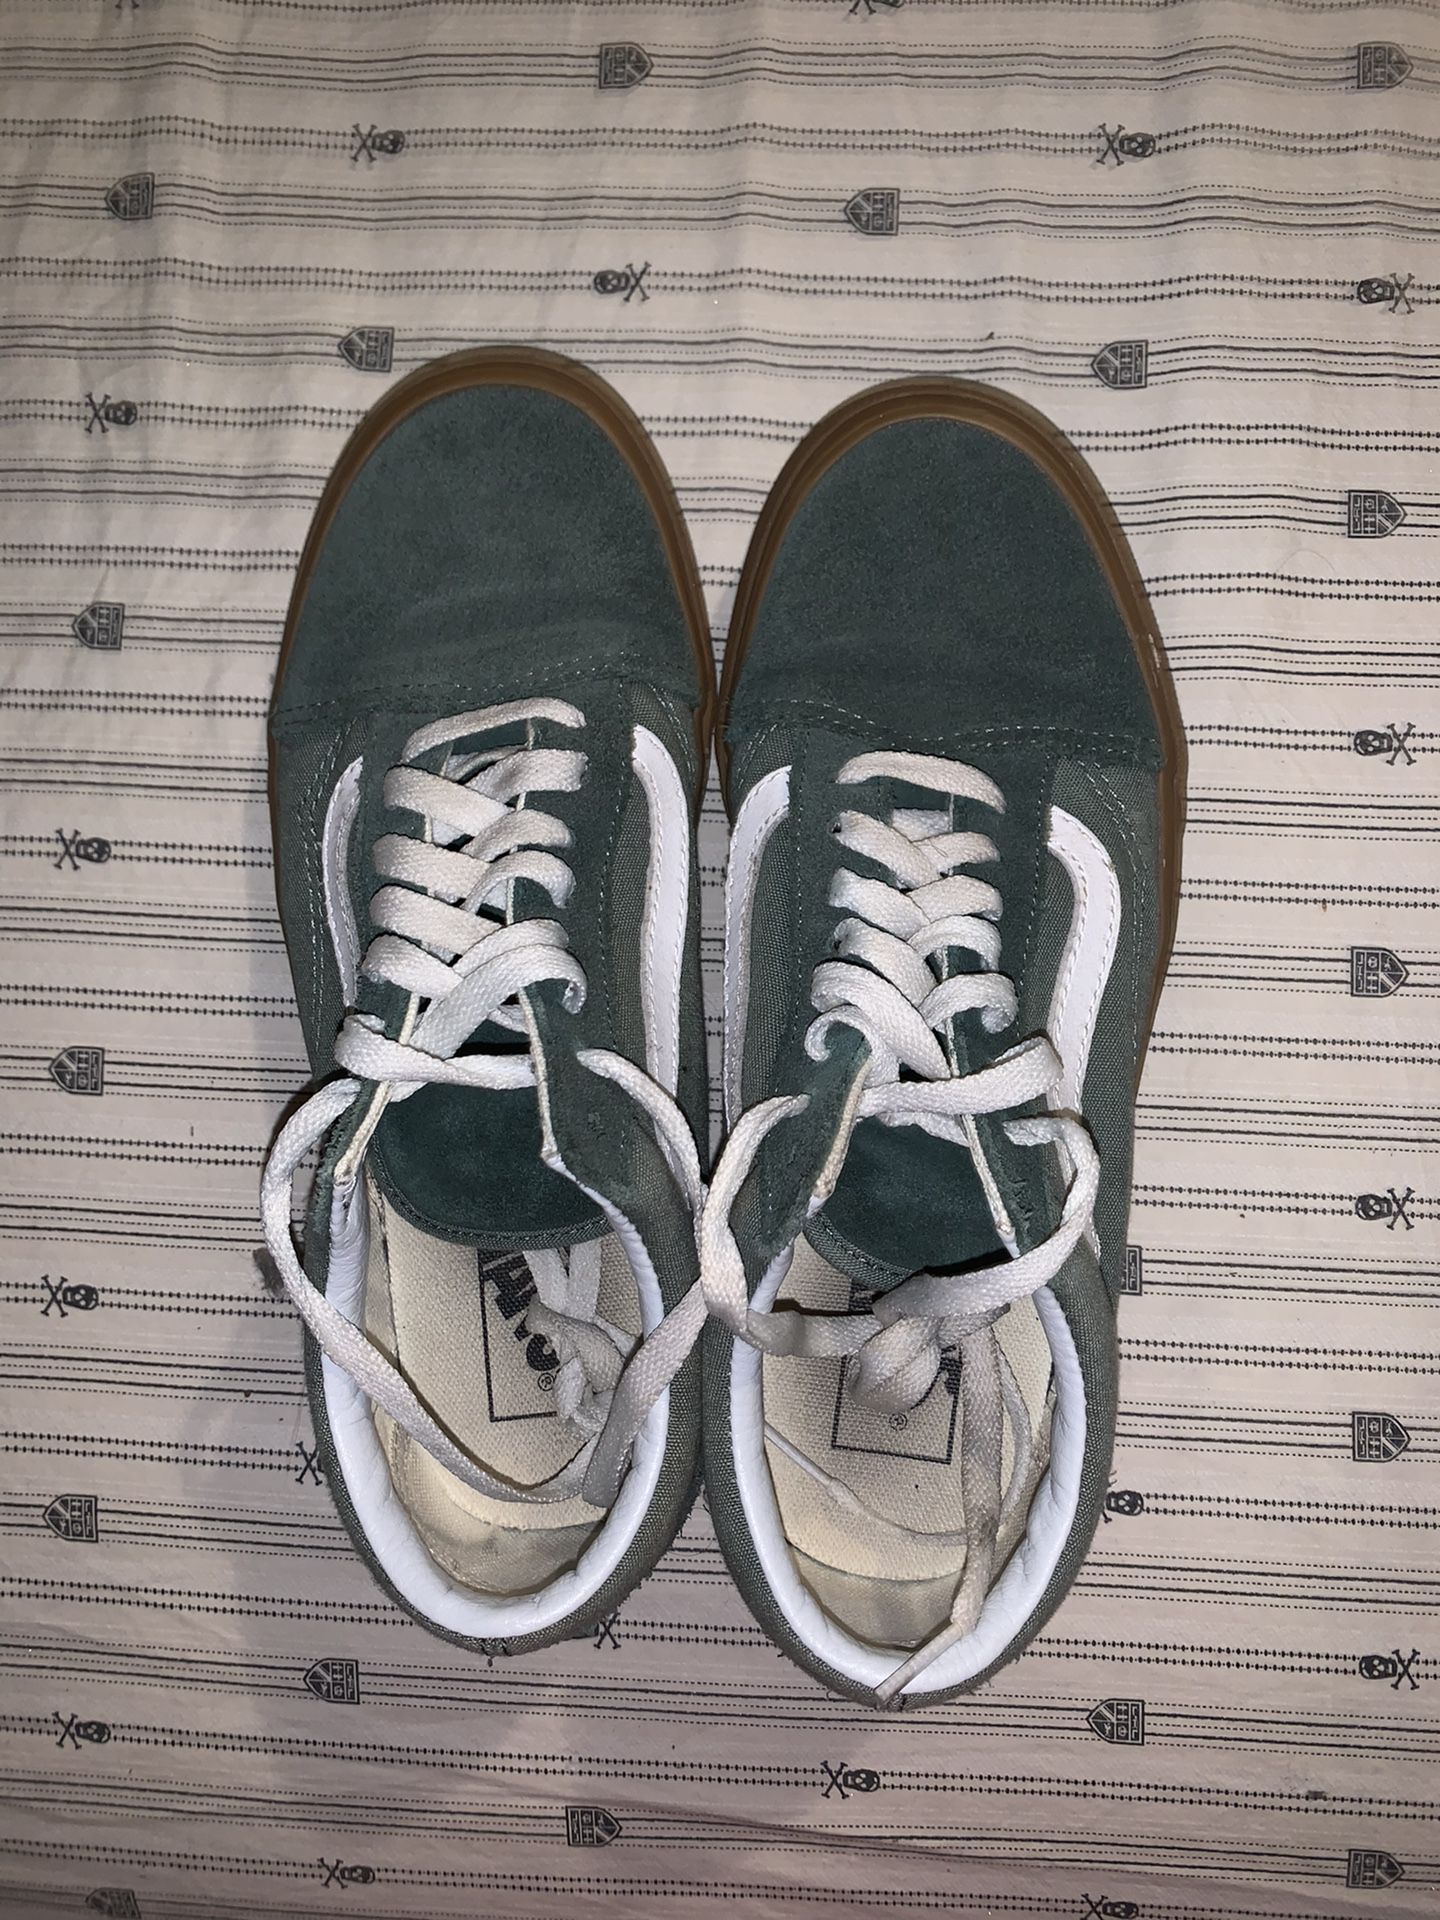 Green vans with a gum base